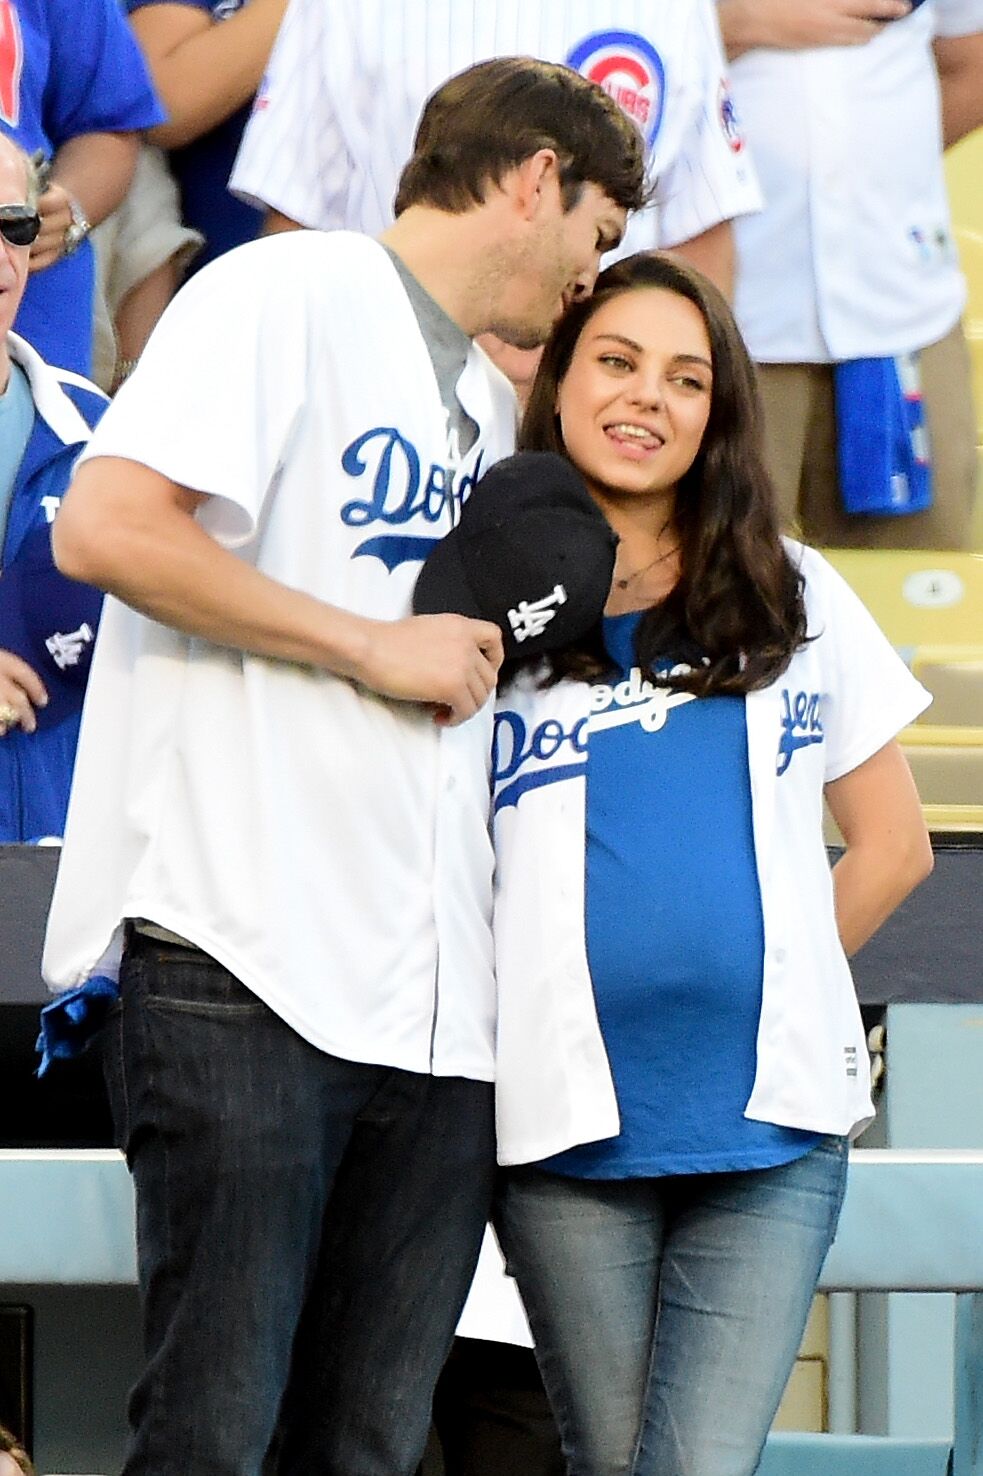 Ashton Kutcher and wife Mila Kunis on the field after they announced the Los Angeles Dodgers starting lineup before game four of the National League Championship Series | Getty Images